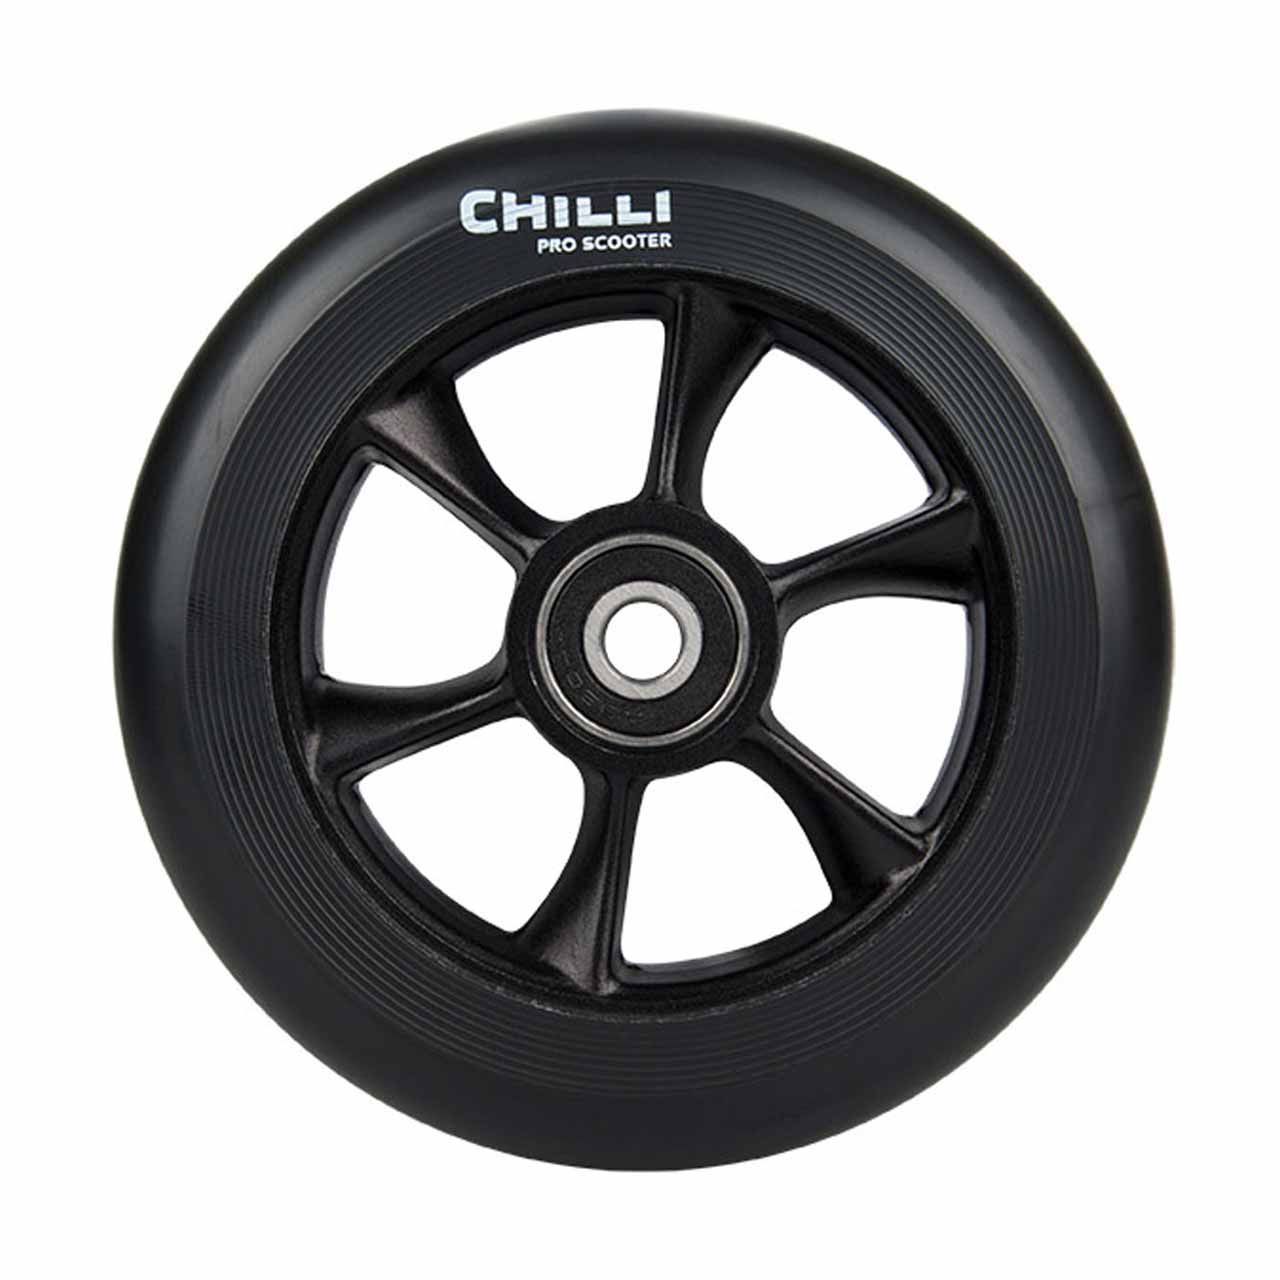 CHILLI PRO SCOOTER Scooter Accessoires TURBO 110mm Rolle 2020 black/black 